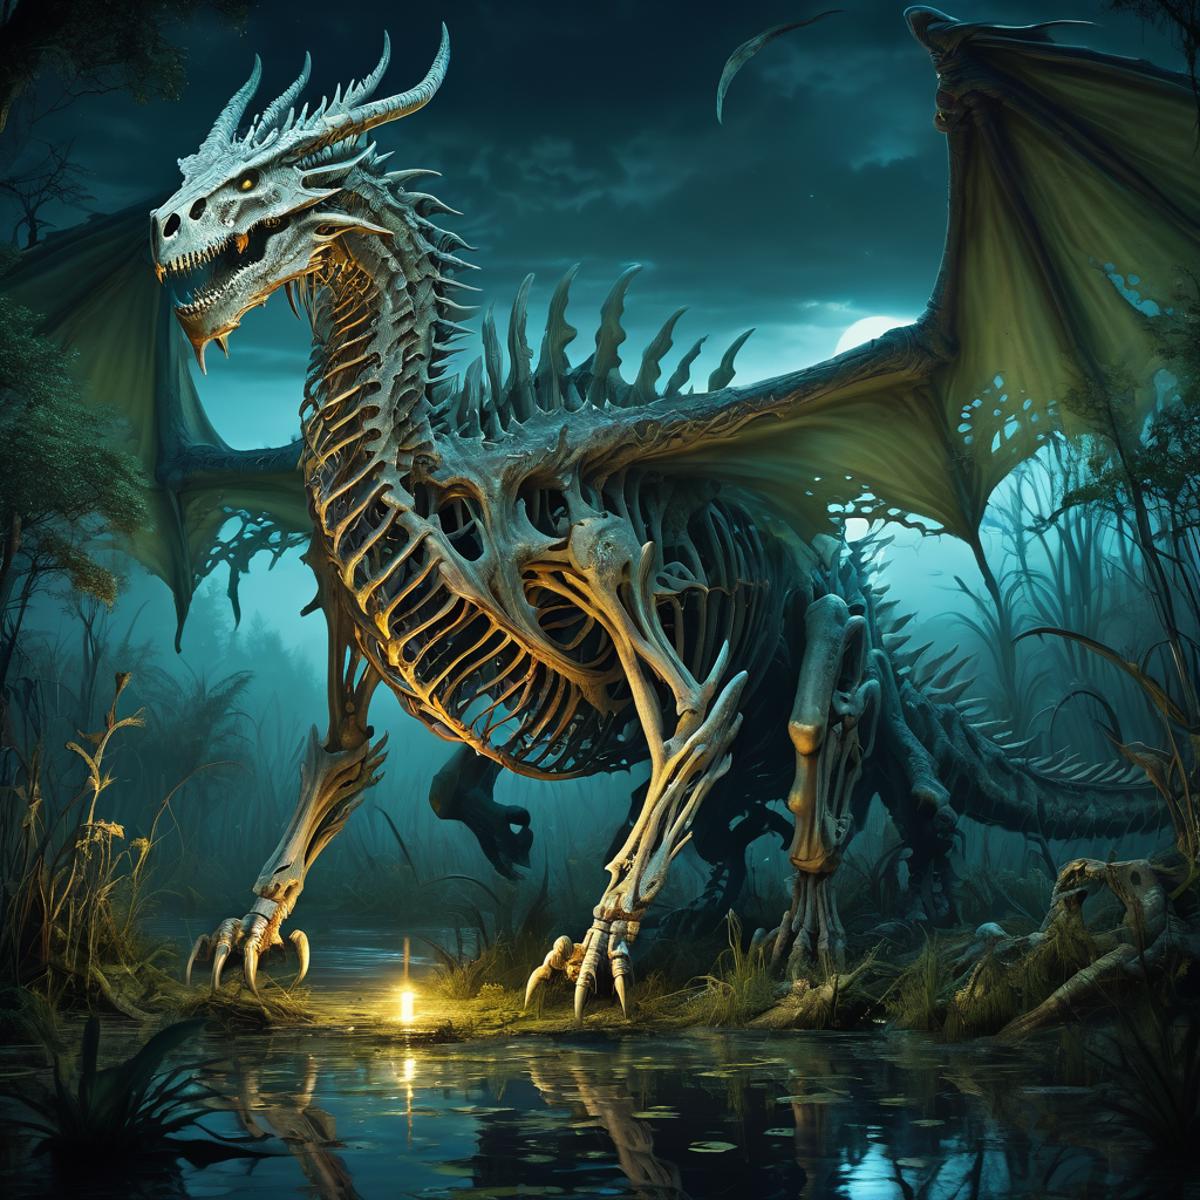 A skeleton dragon standing in a swamp with a glowing light in the background.